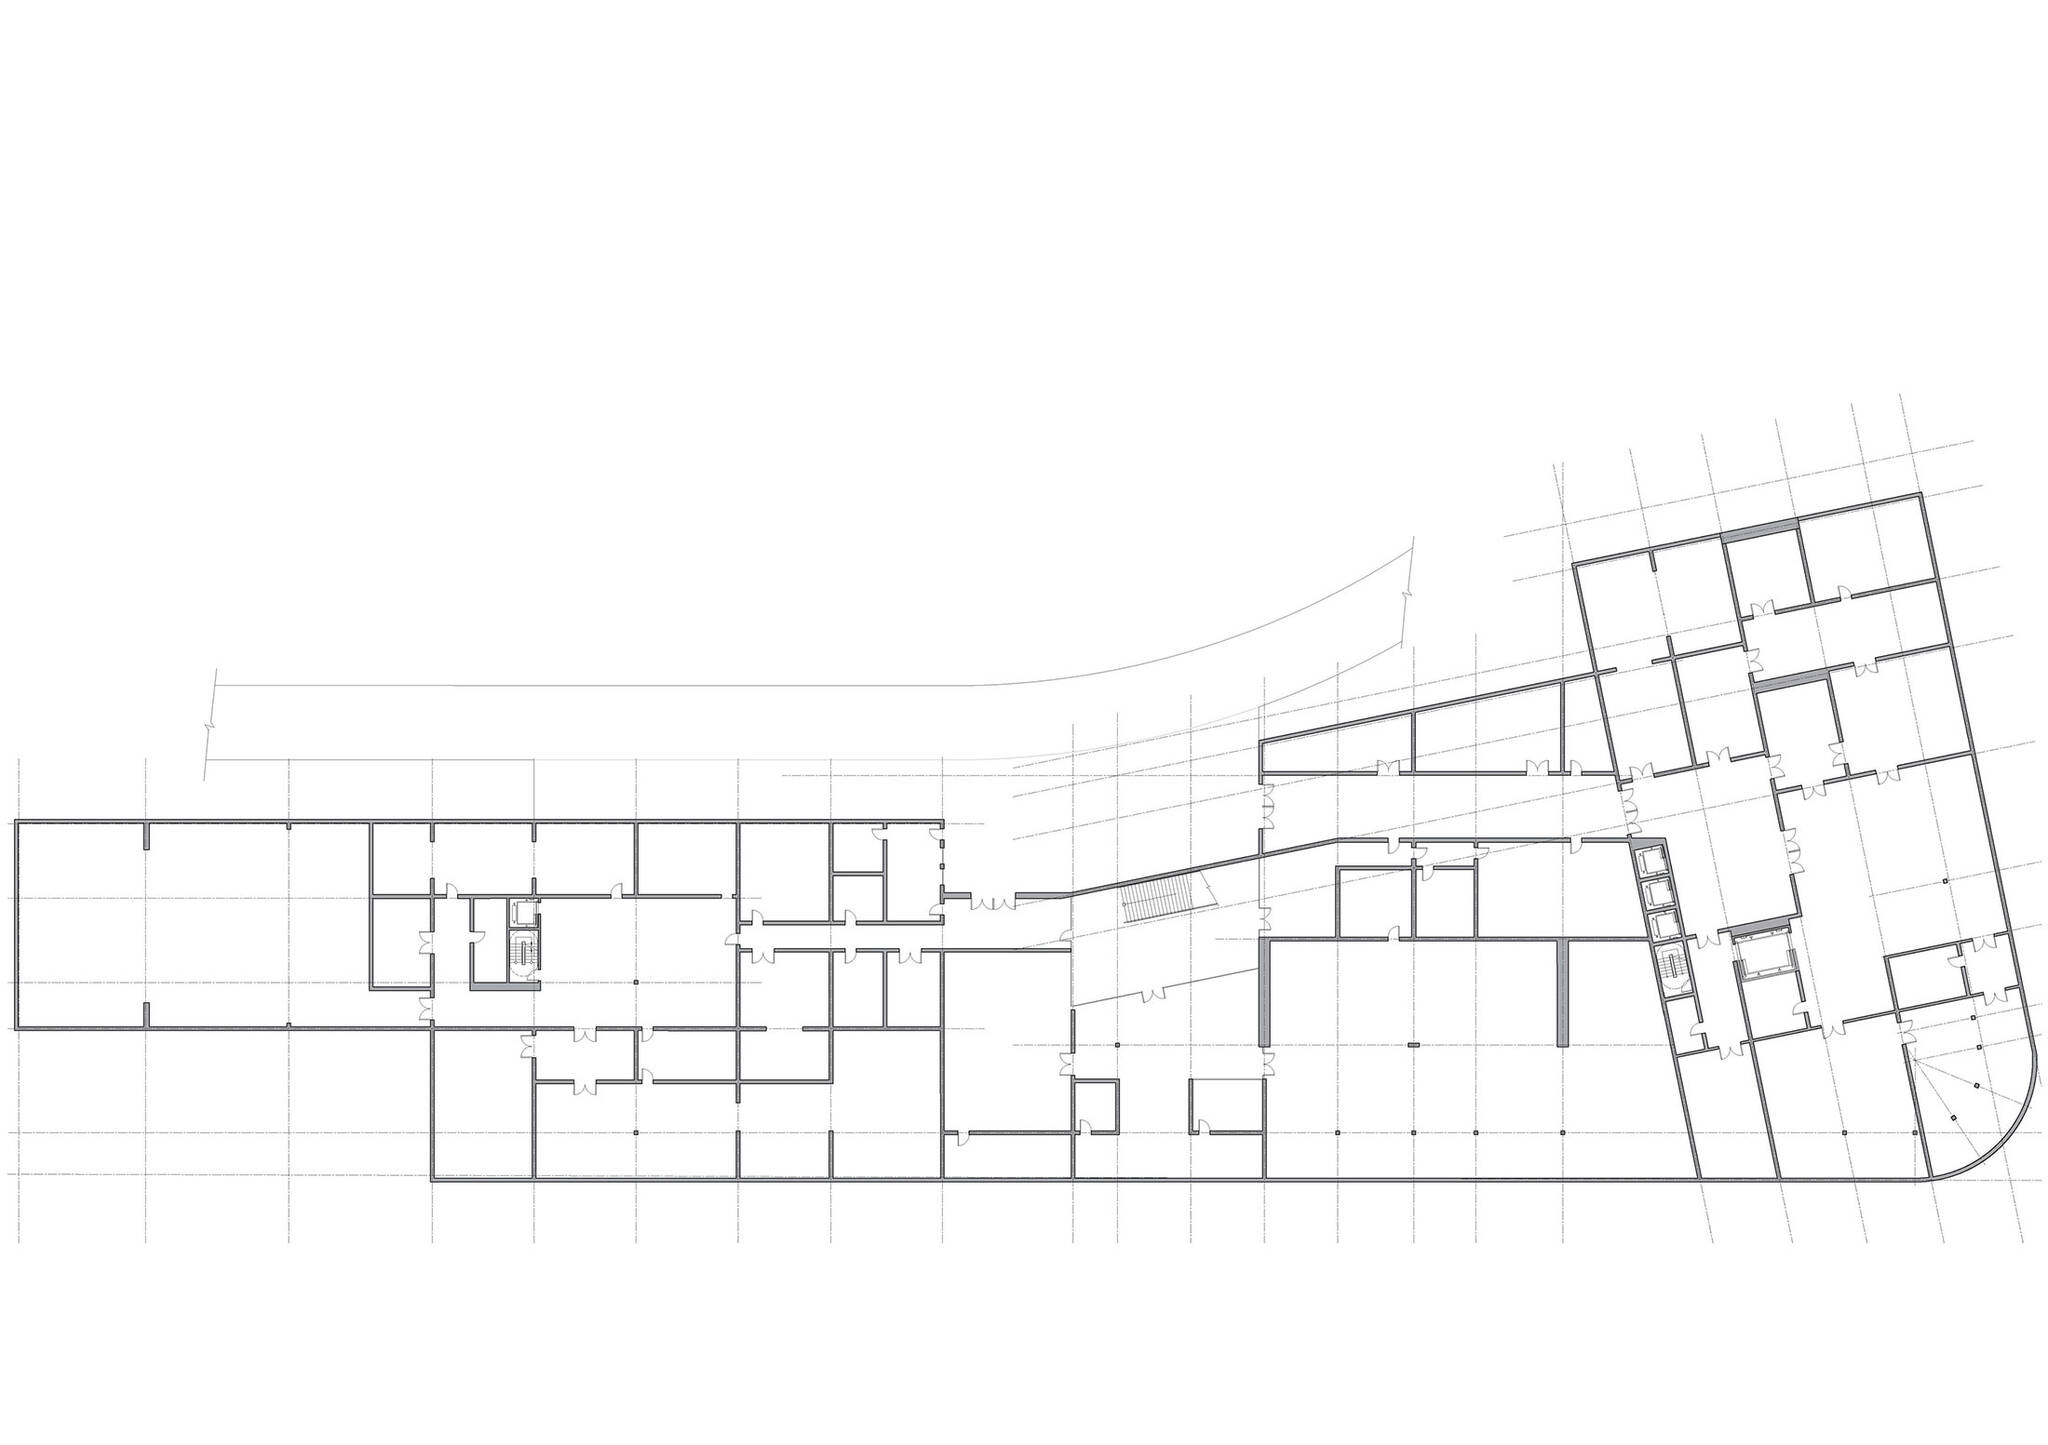 Cellar floor plan of the Museum of Etnography project located in Budapest, Hungary designed by the architecture studio Danny Forster & Architecture